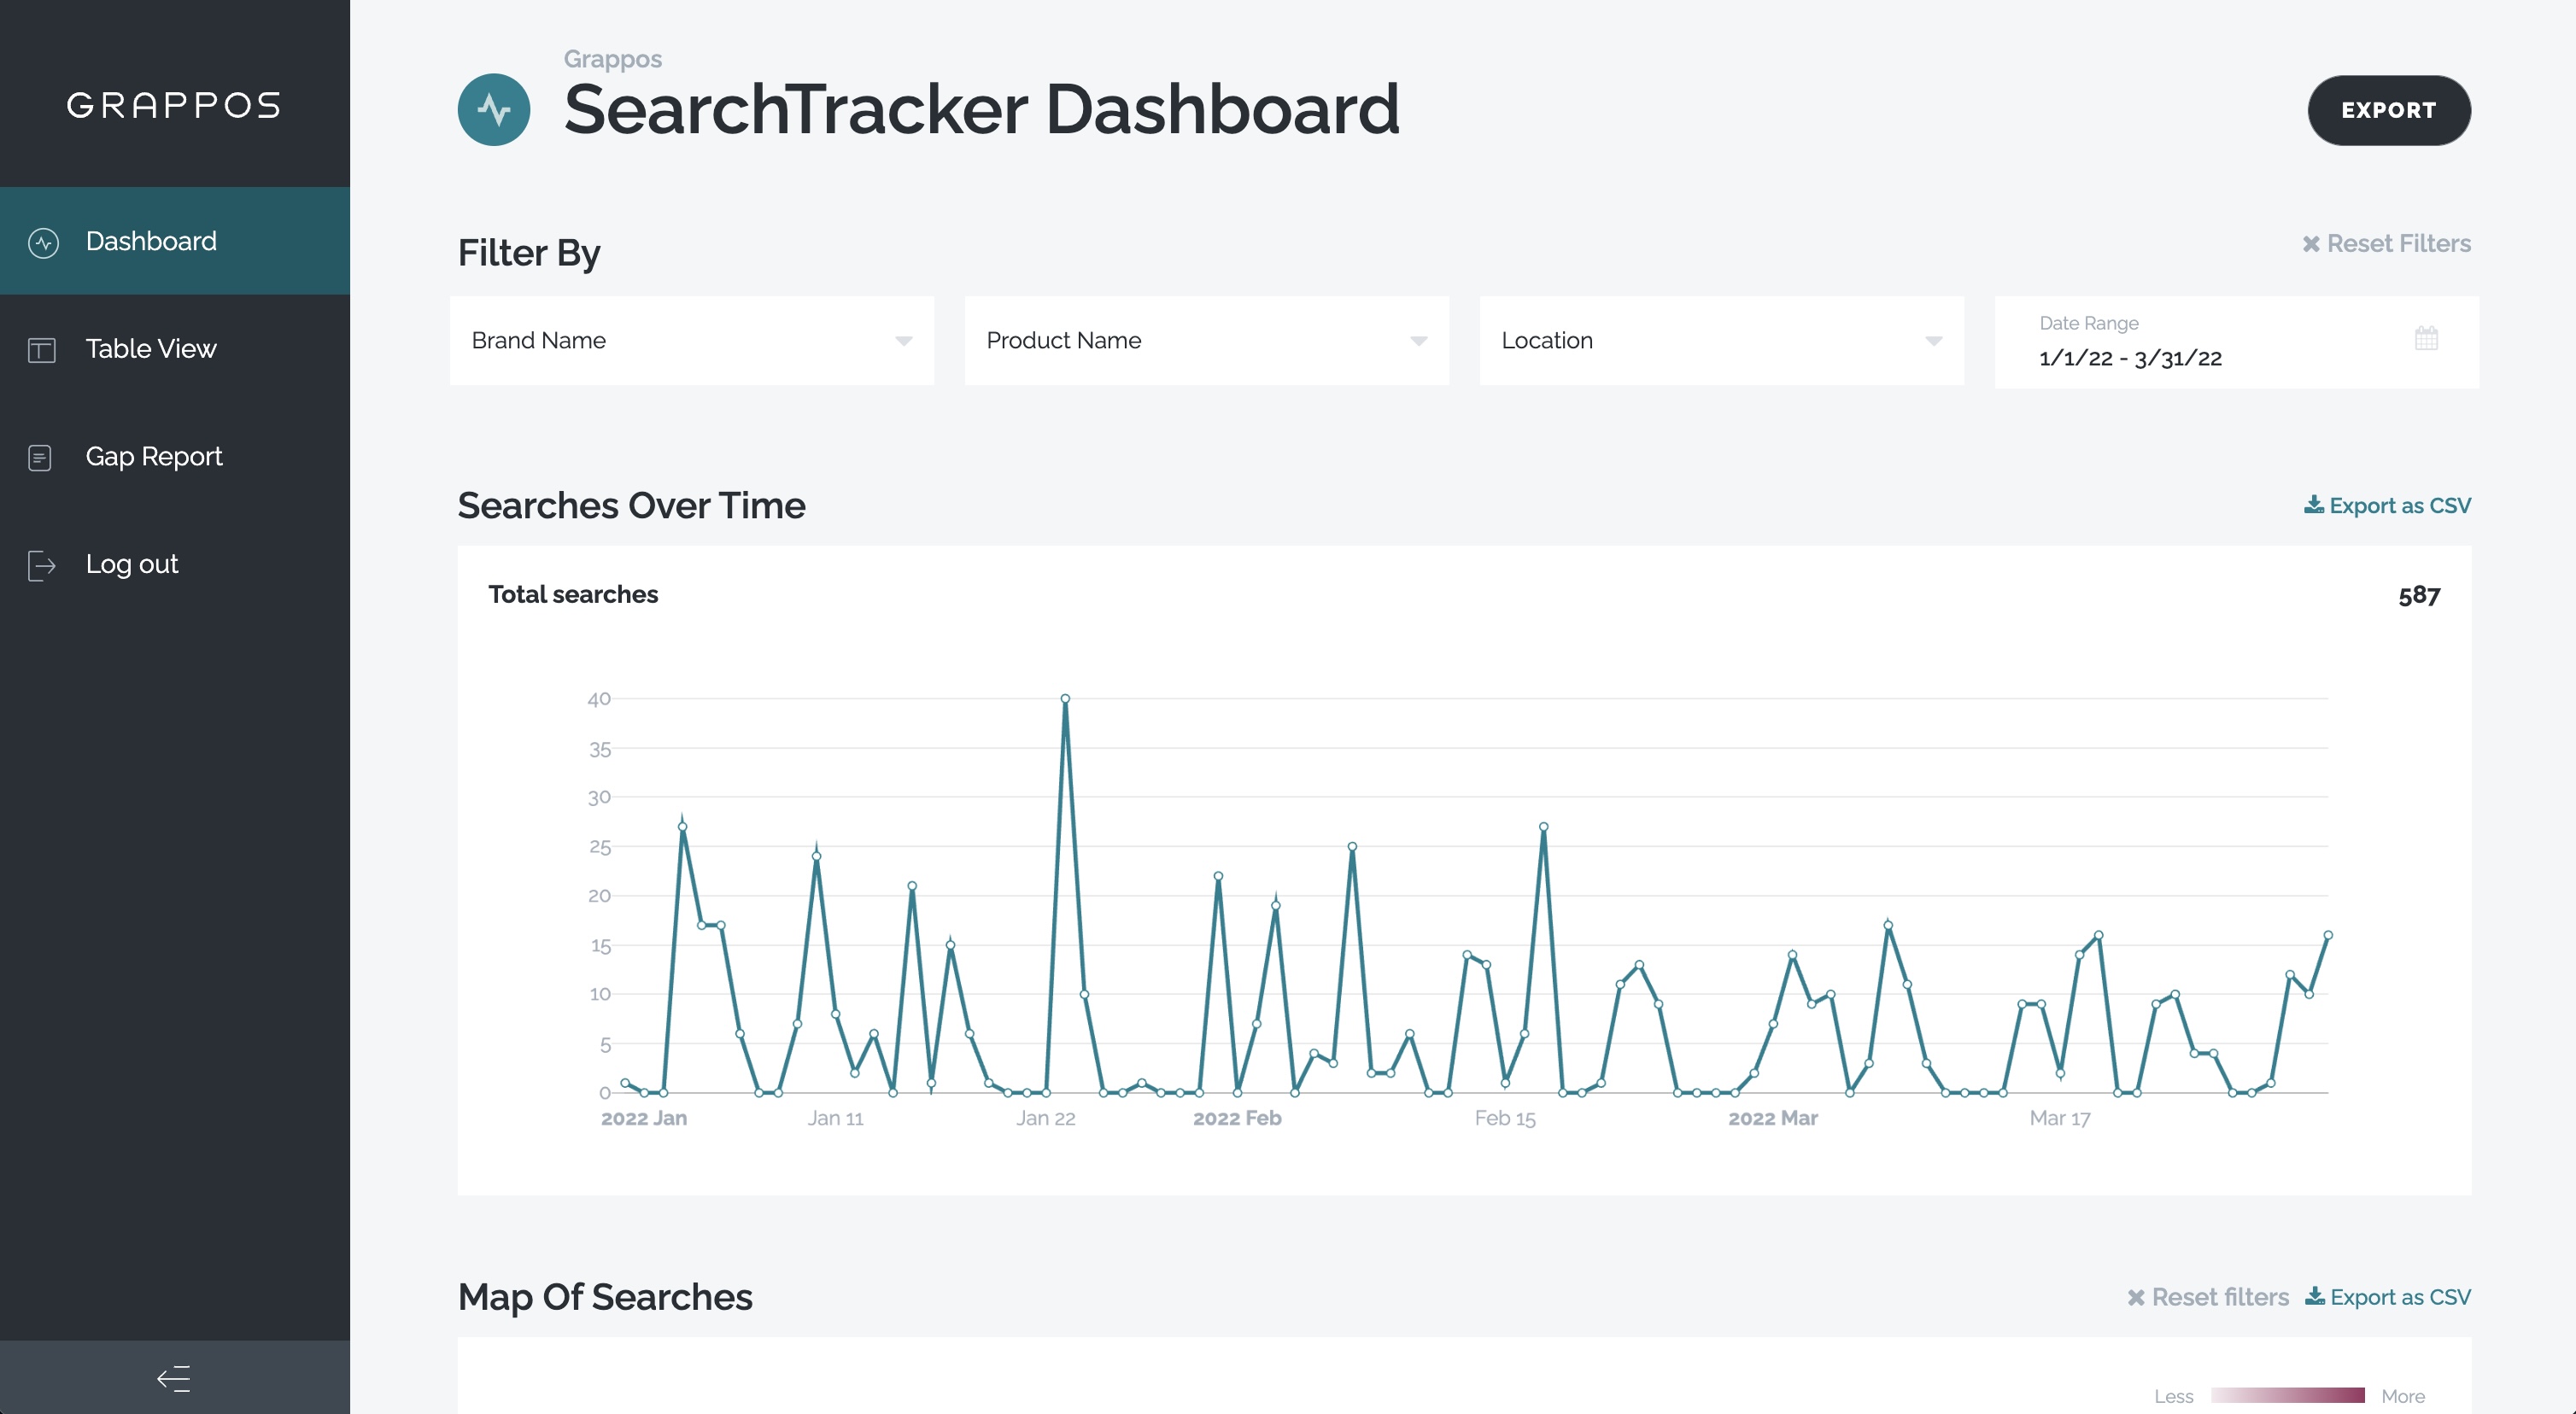 The Grappos SearchTracker allows you to monitor searches in real time, quickly review topline stats, and export search data.